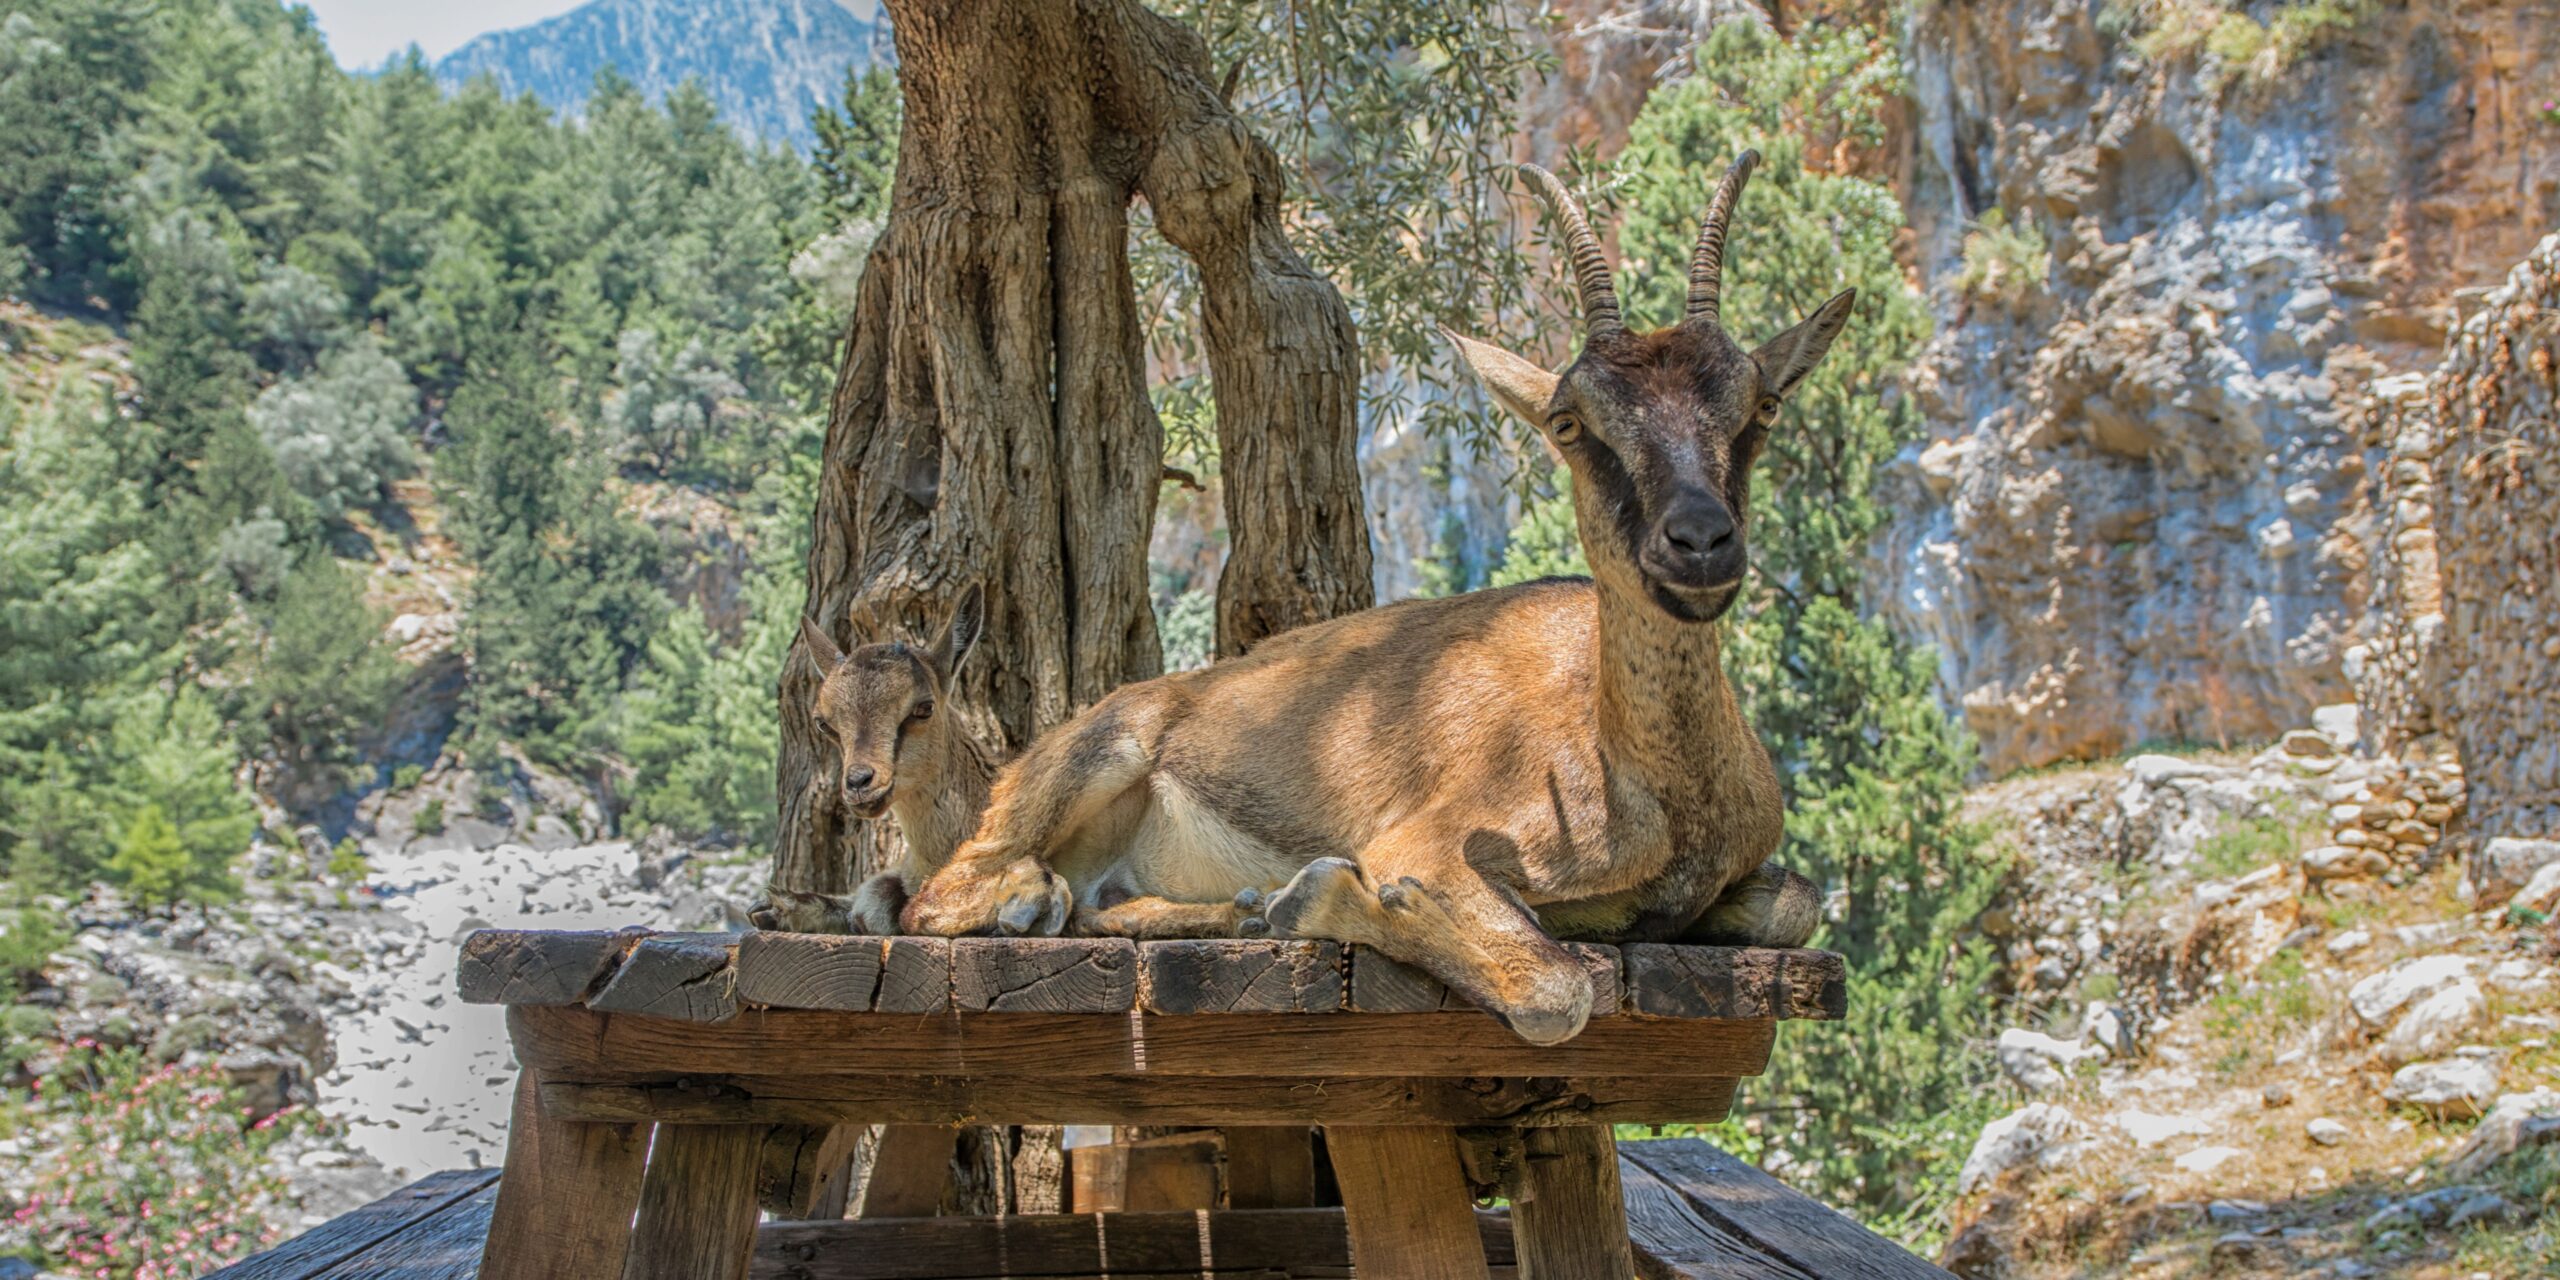 Two goats resting on a wooden platform with a backdrop of trees and rocky terrain.